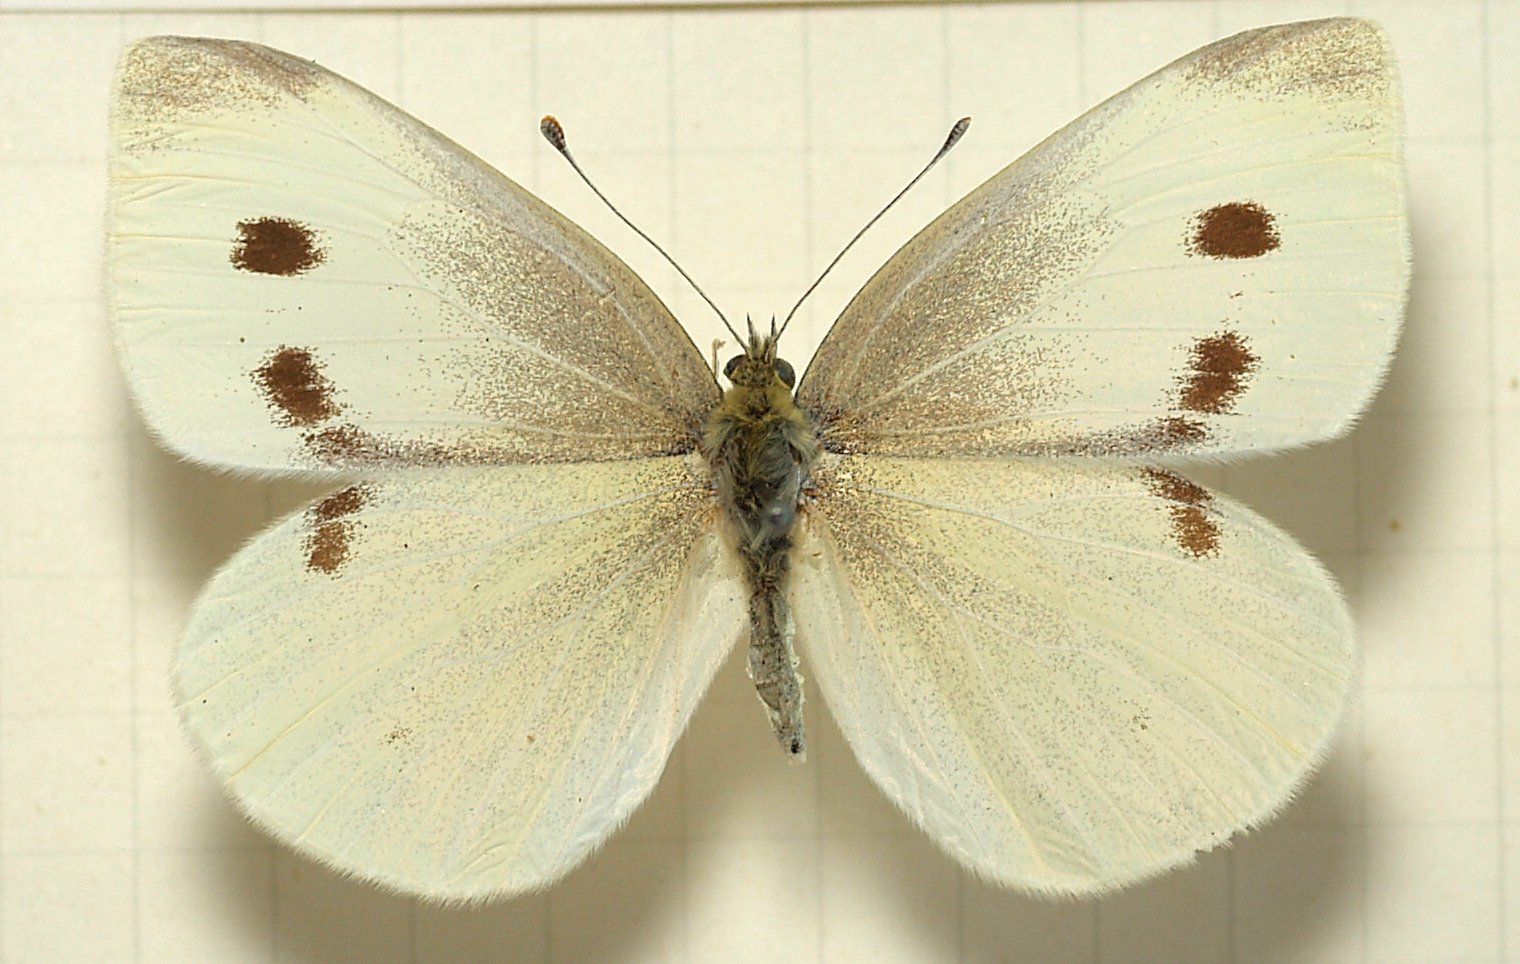 What is another name for a white butterfly?